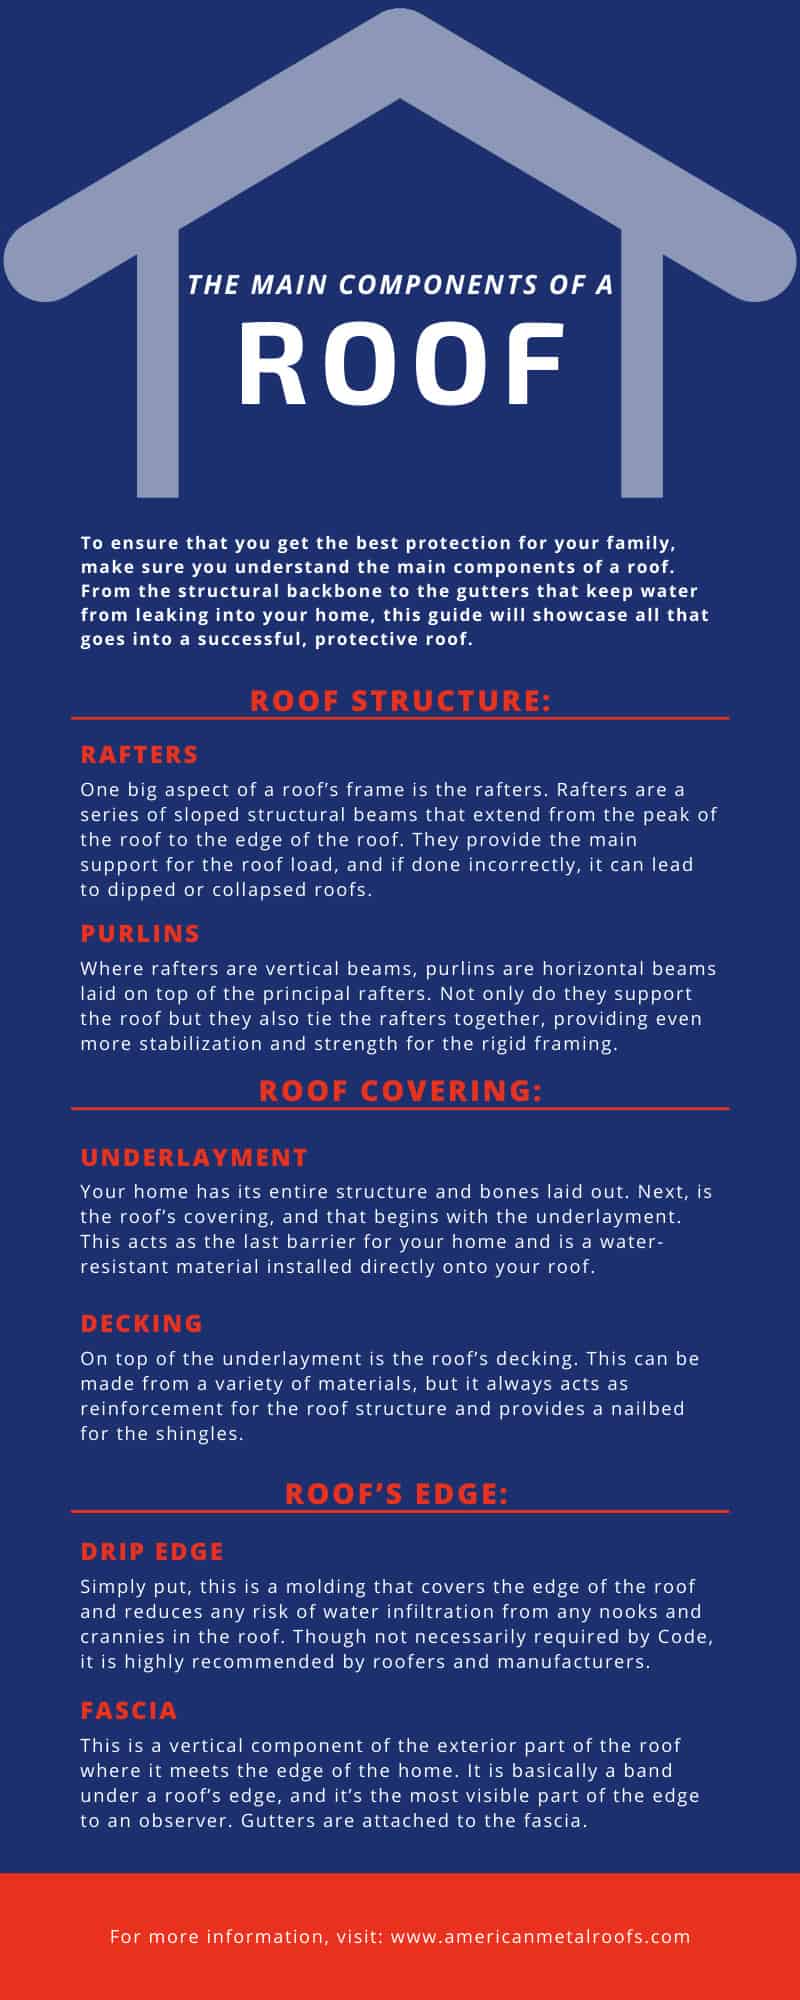 Components of a Roof